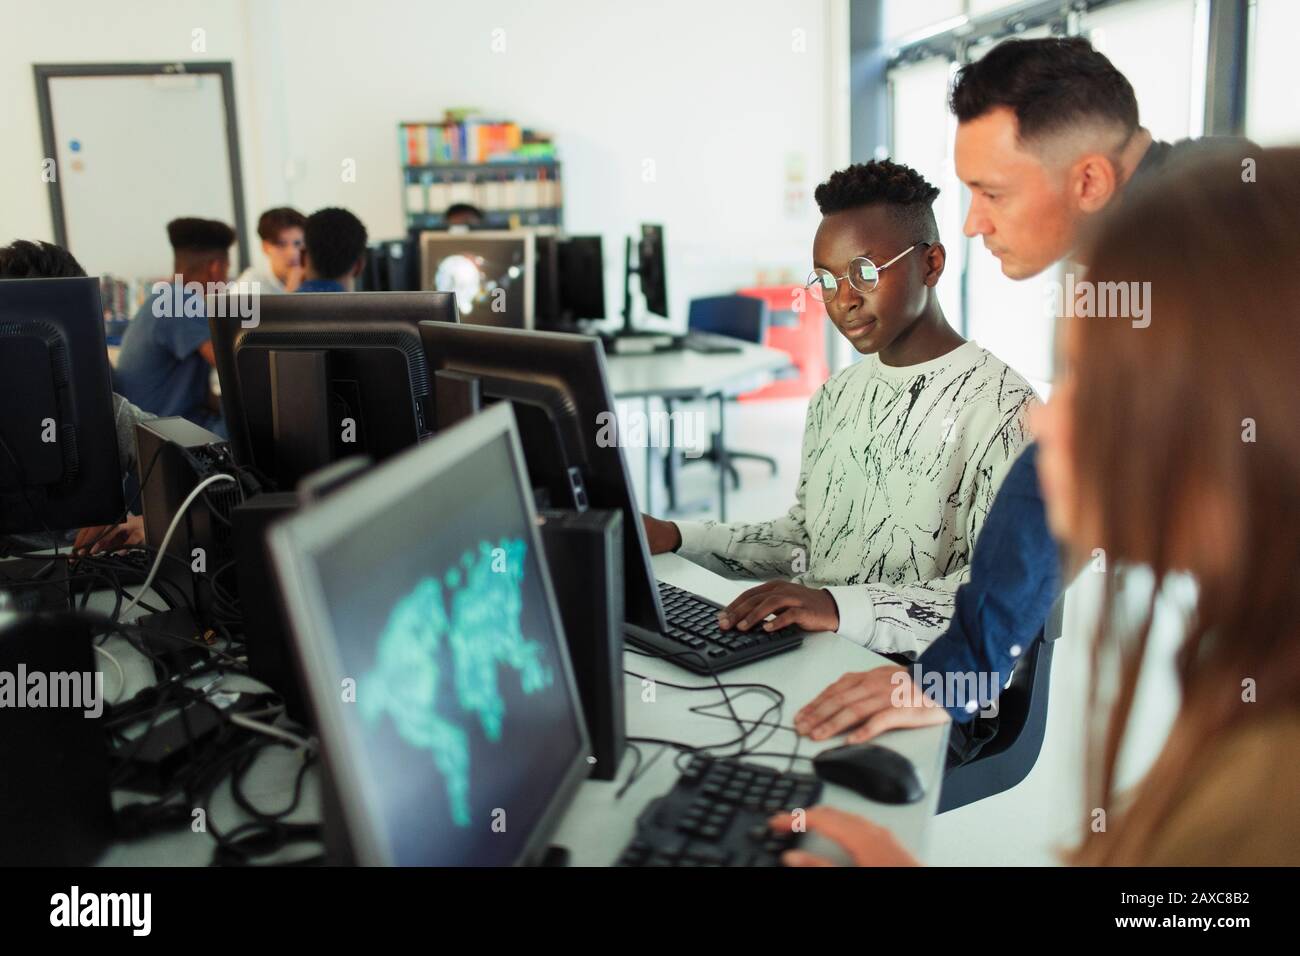 Male junior high teacher helping boy student using computer in computer lab Stock Photo